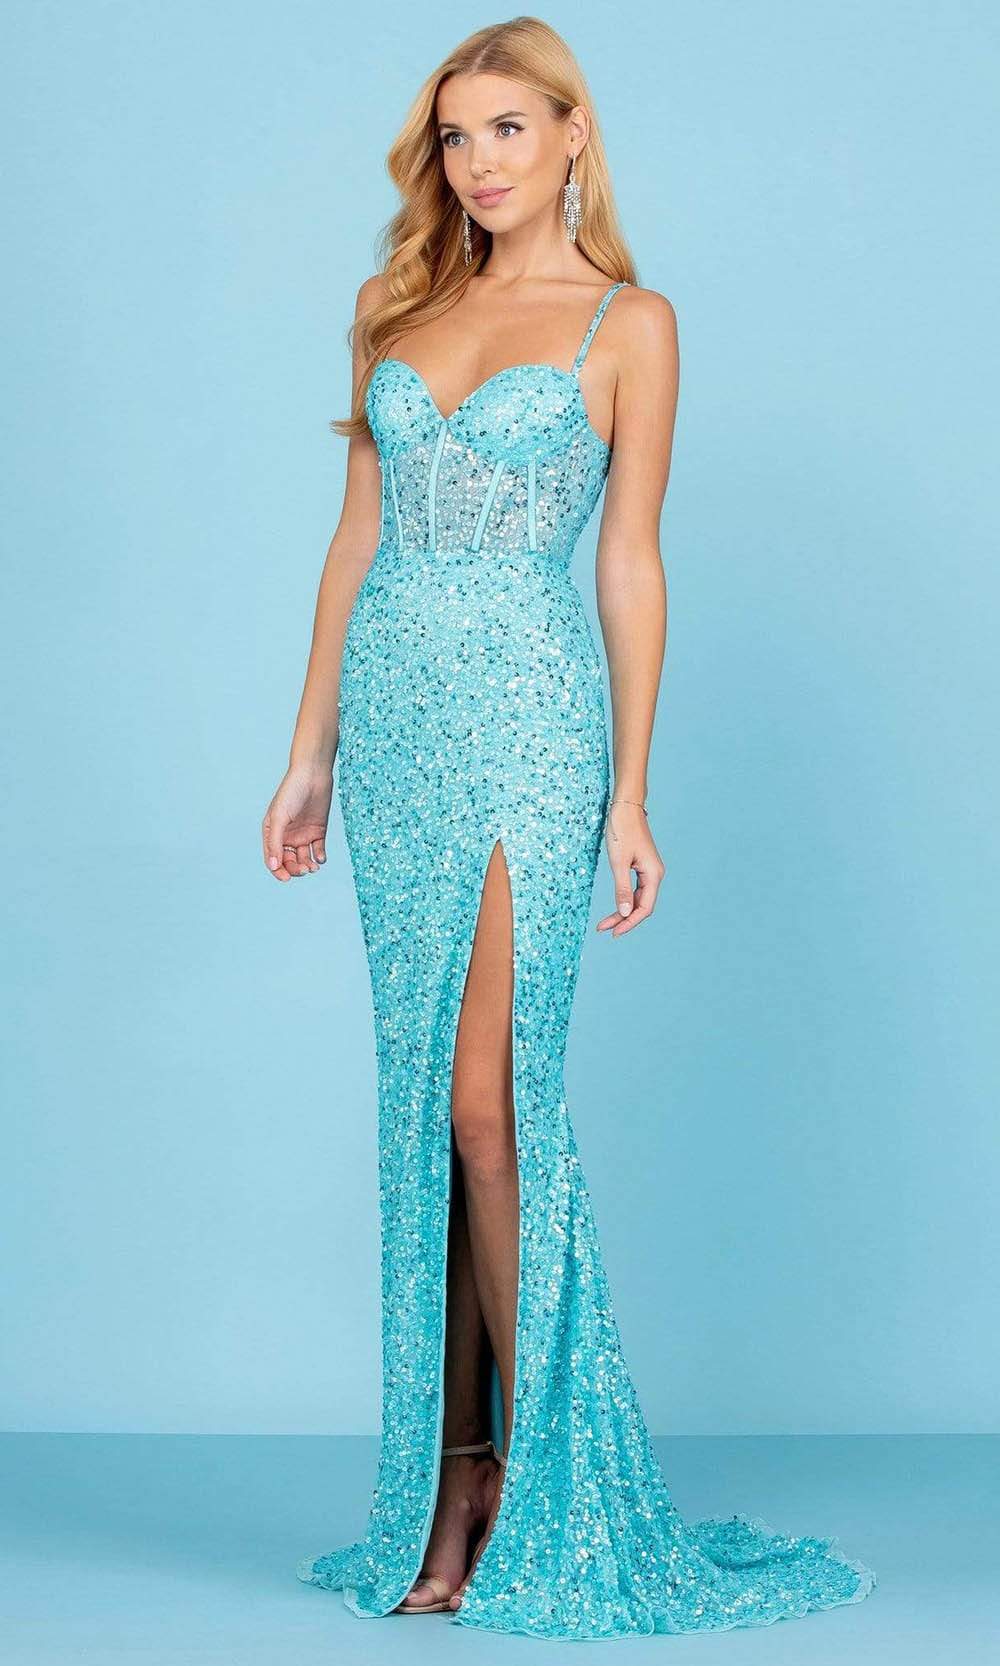 SCALA - 60284 Sequined Corset High Slit Gown Prom Dresses 00 / Turquoise